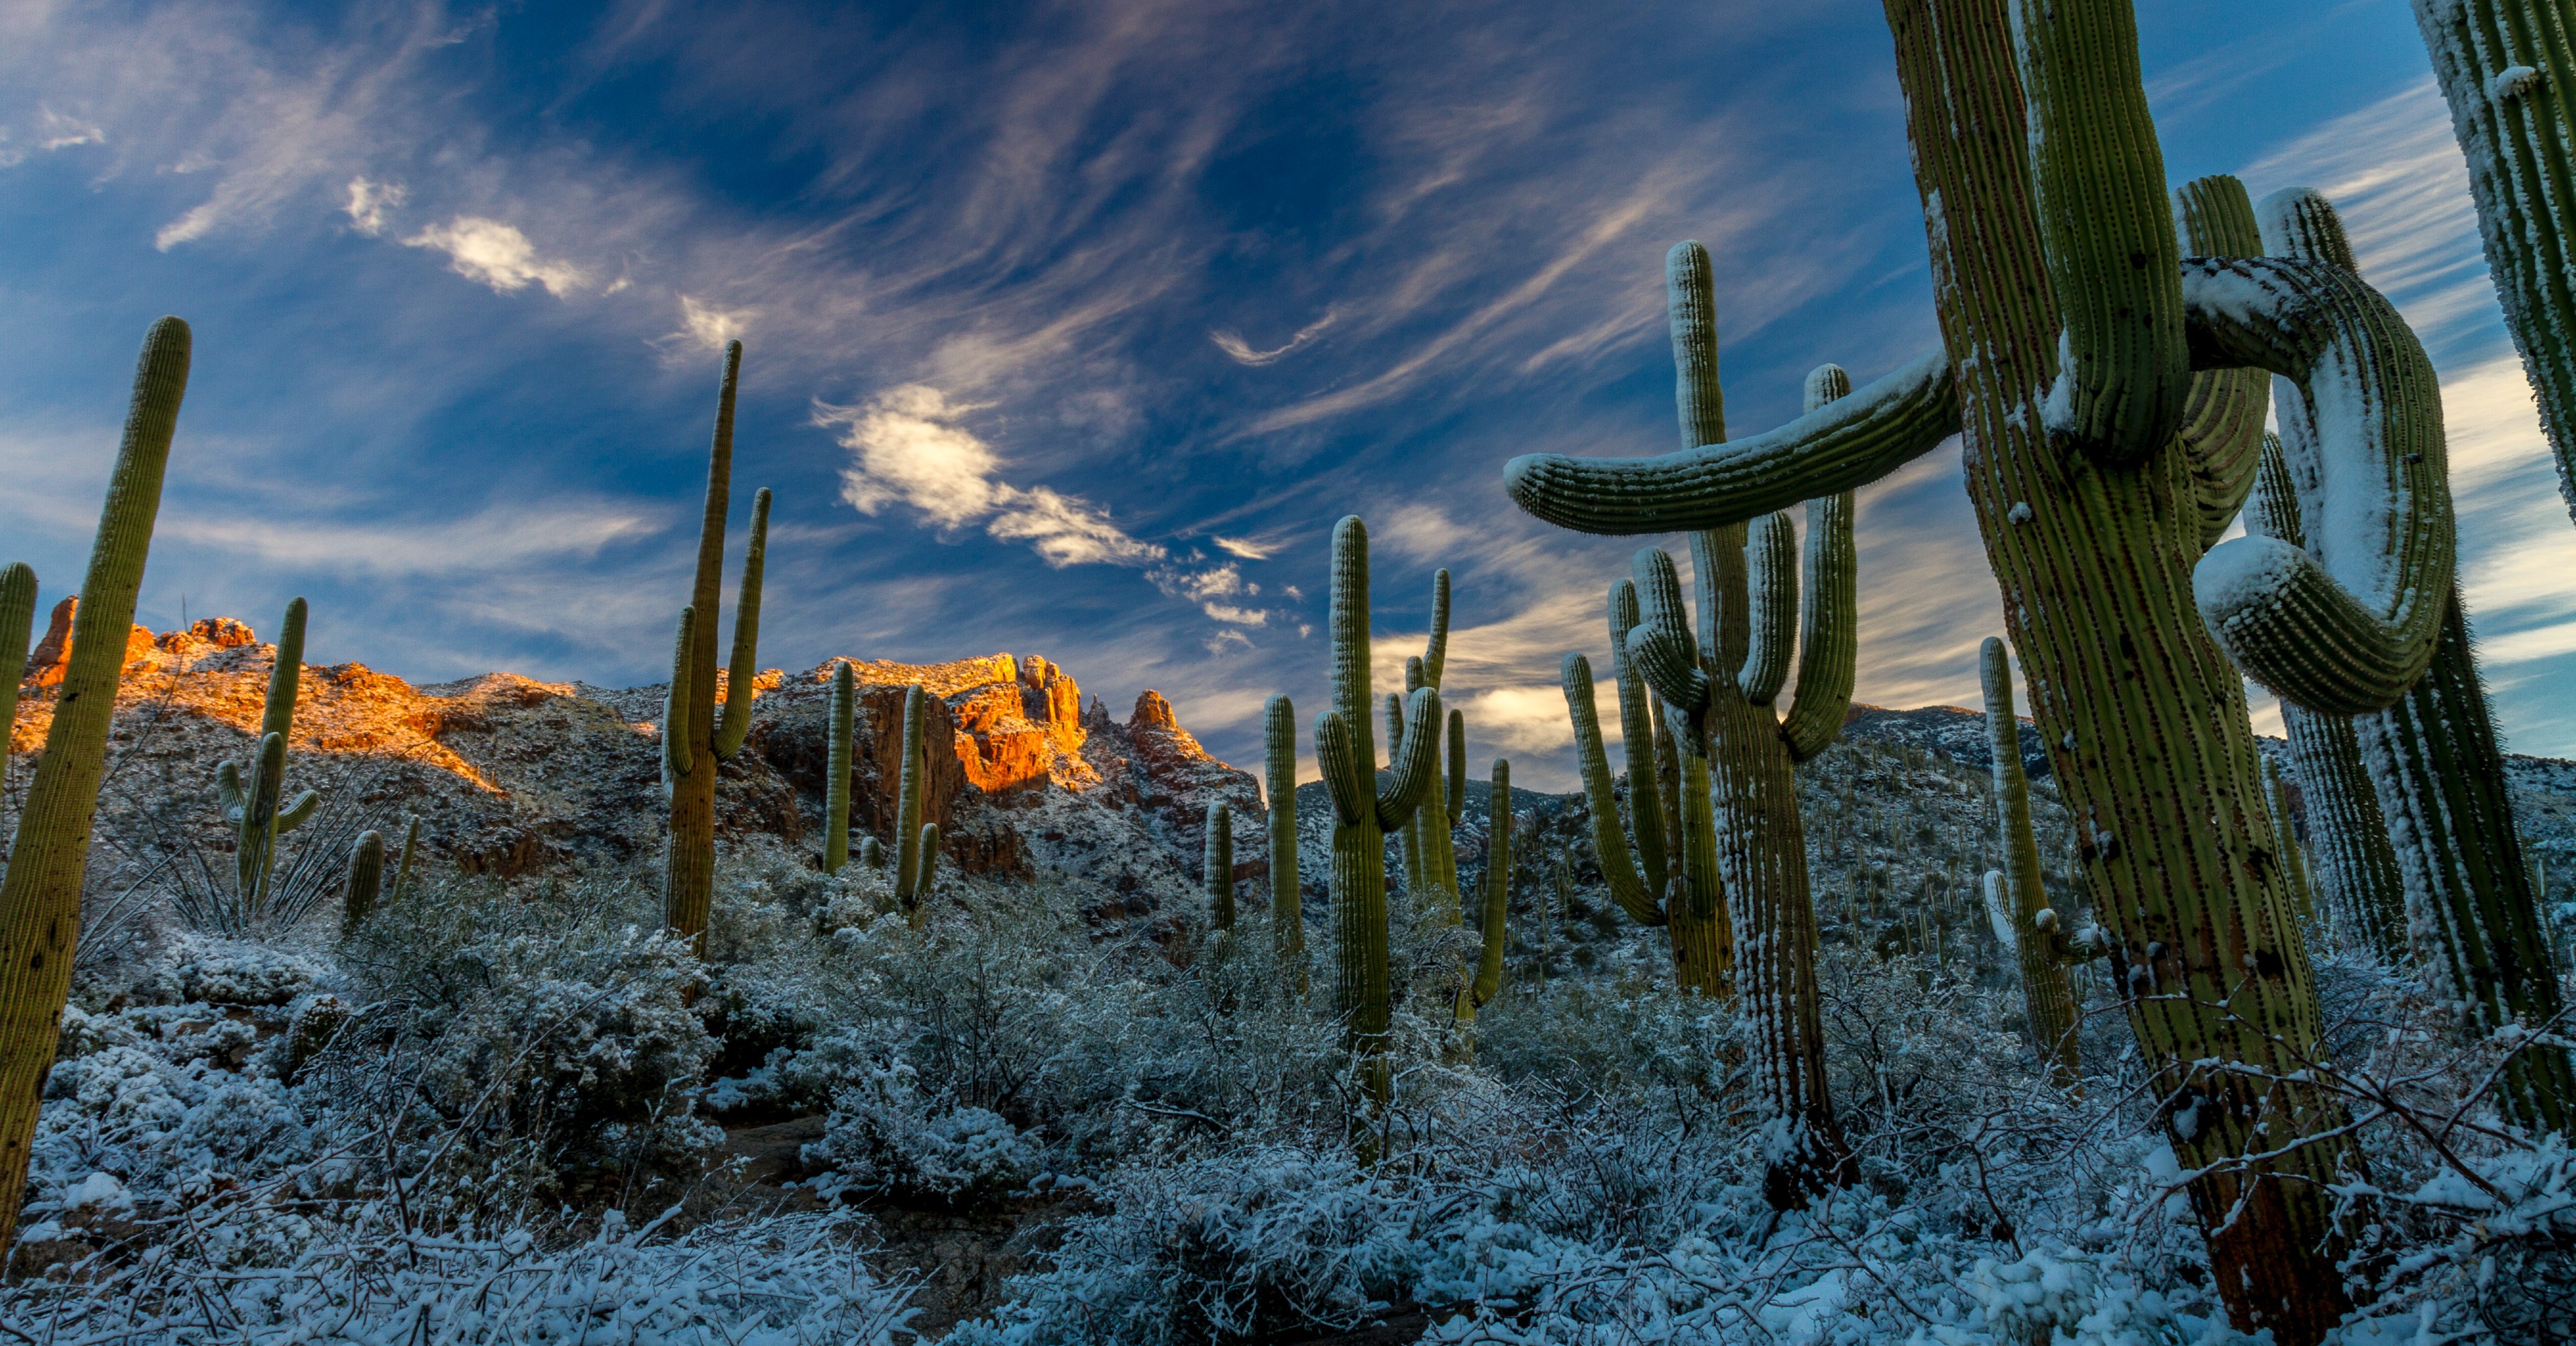 Image of cacti covered in snow